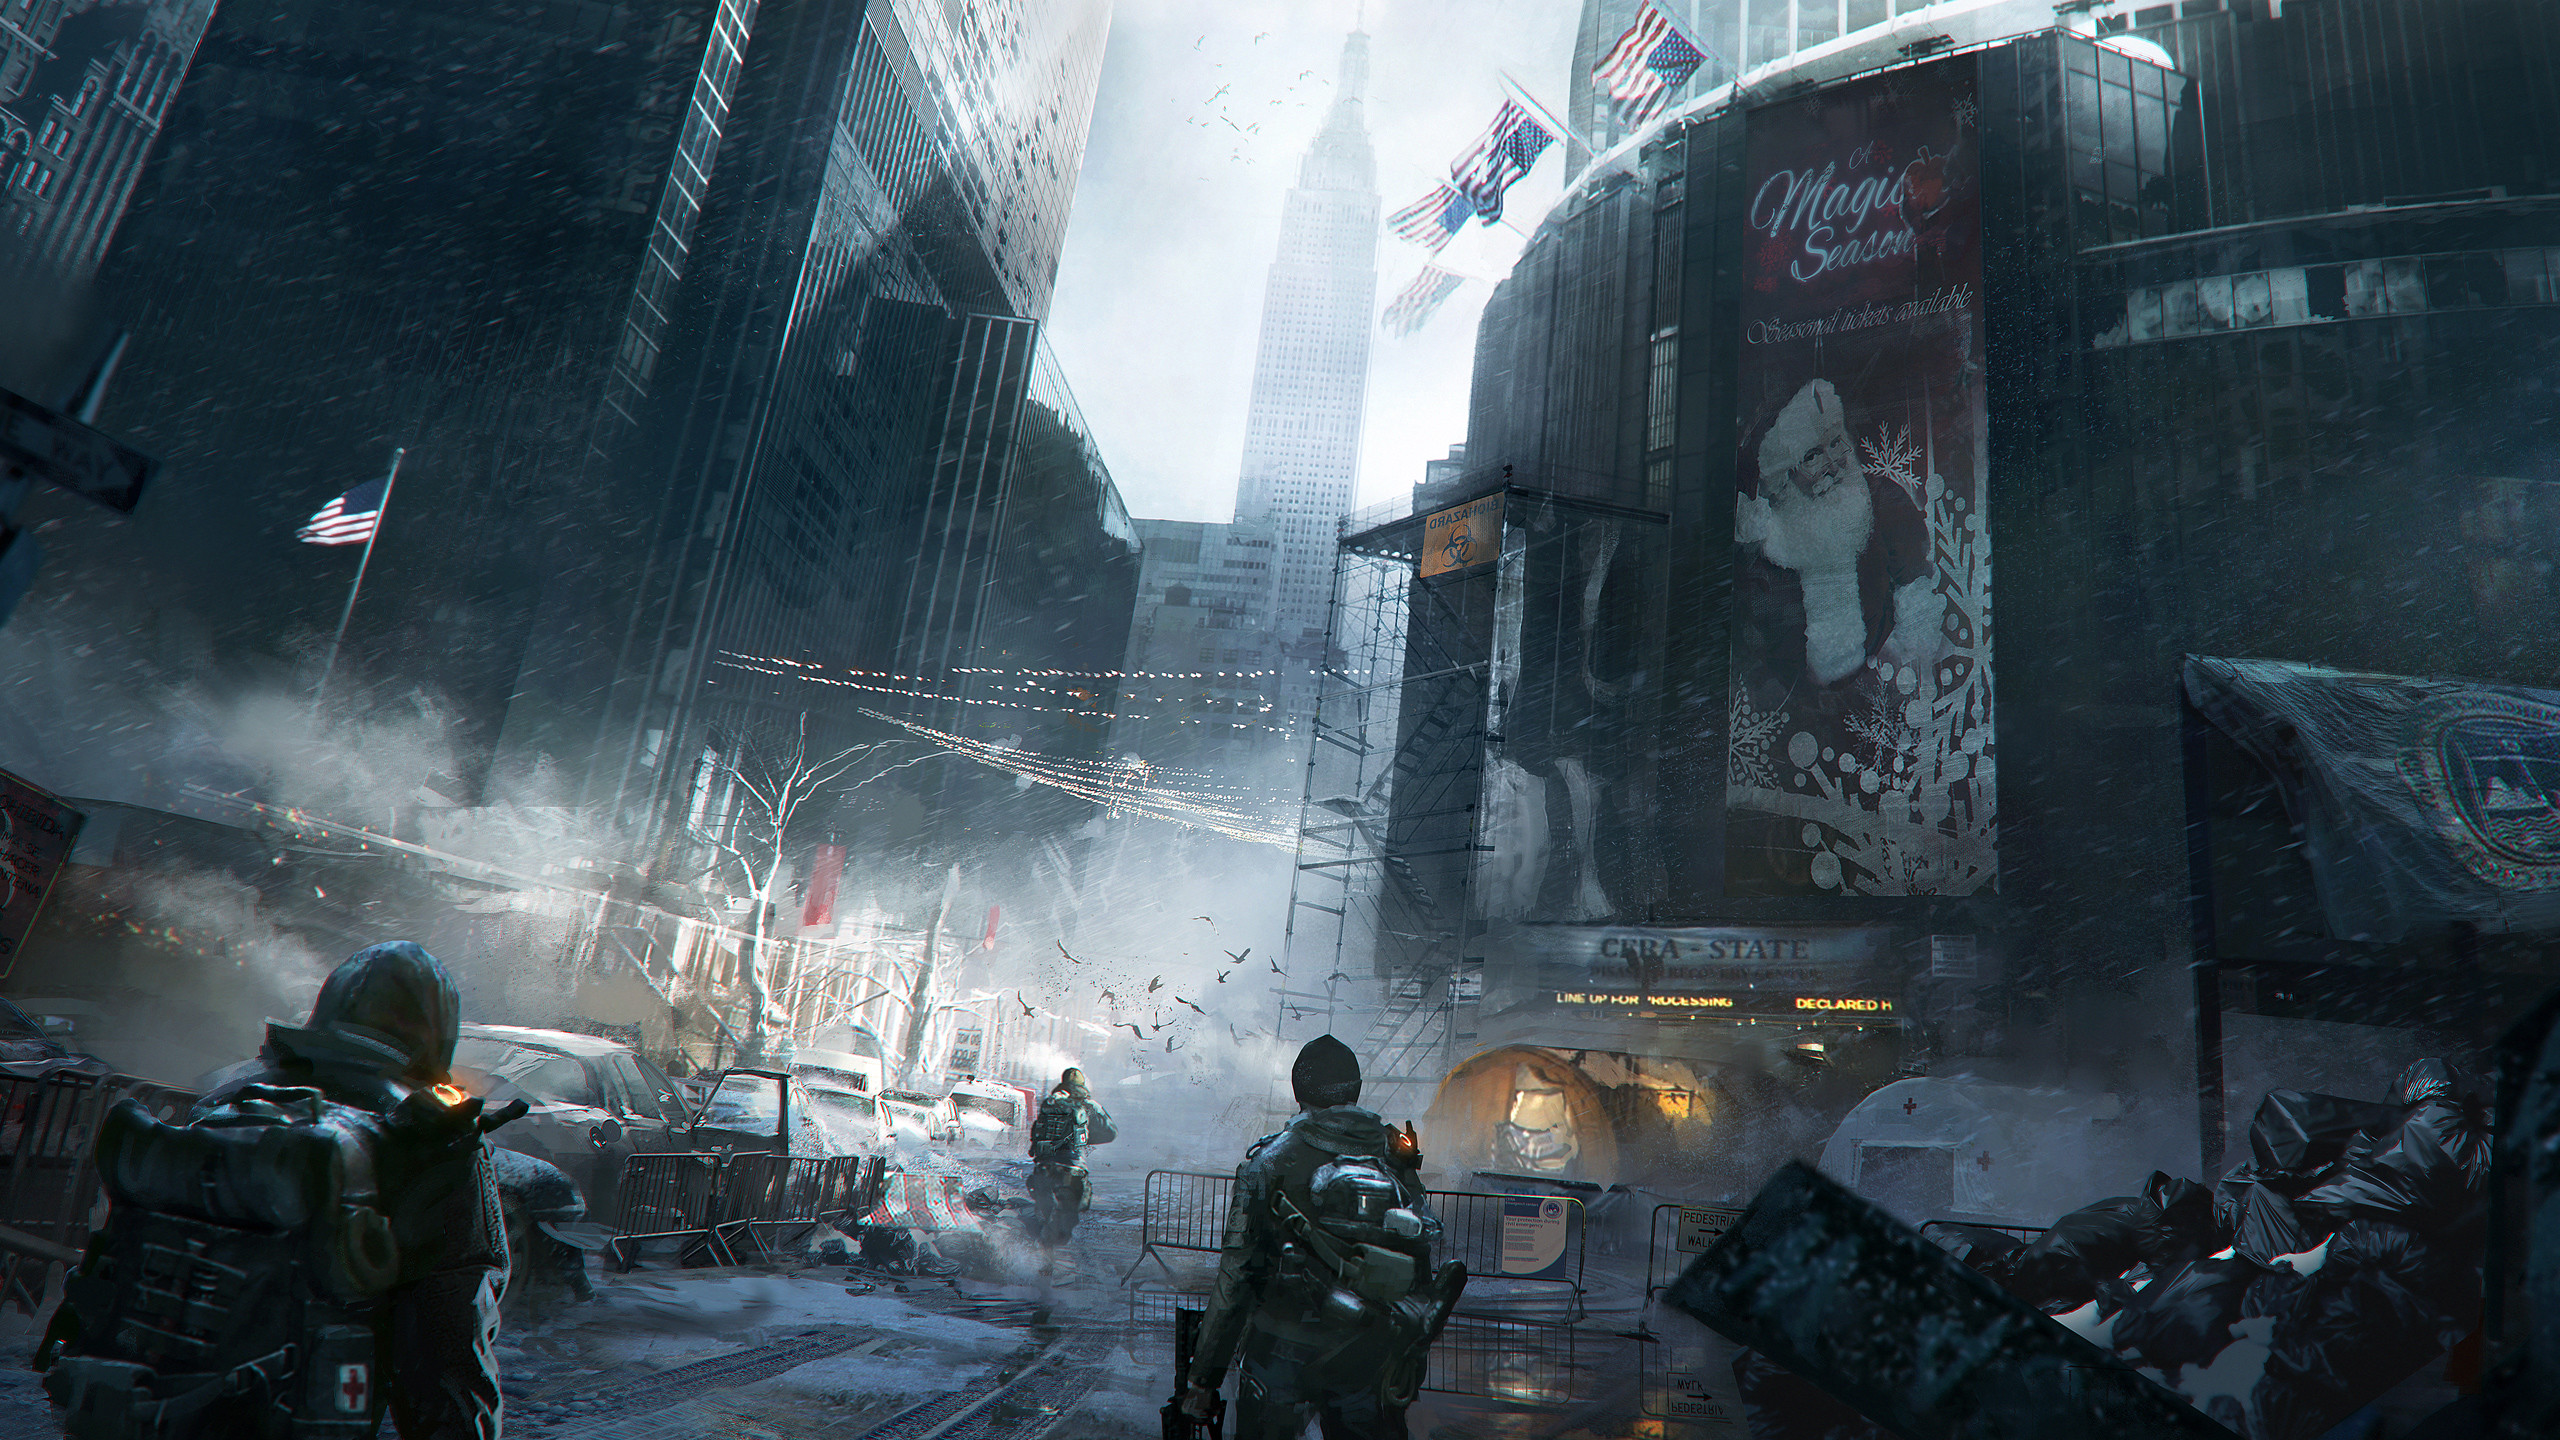 2560x1440 view image. Found on: division-2-wallpaper/